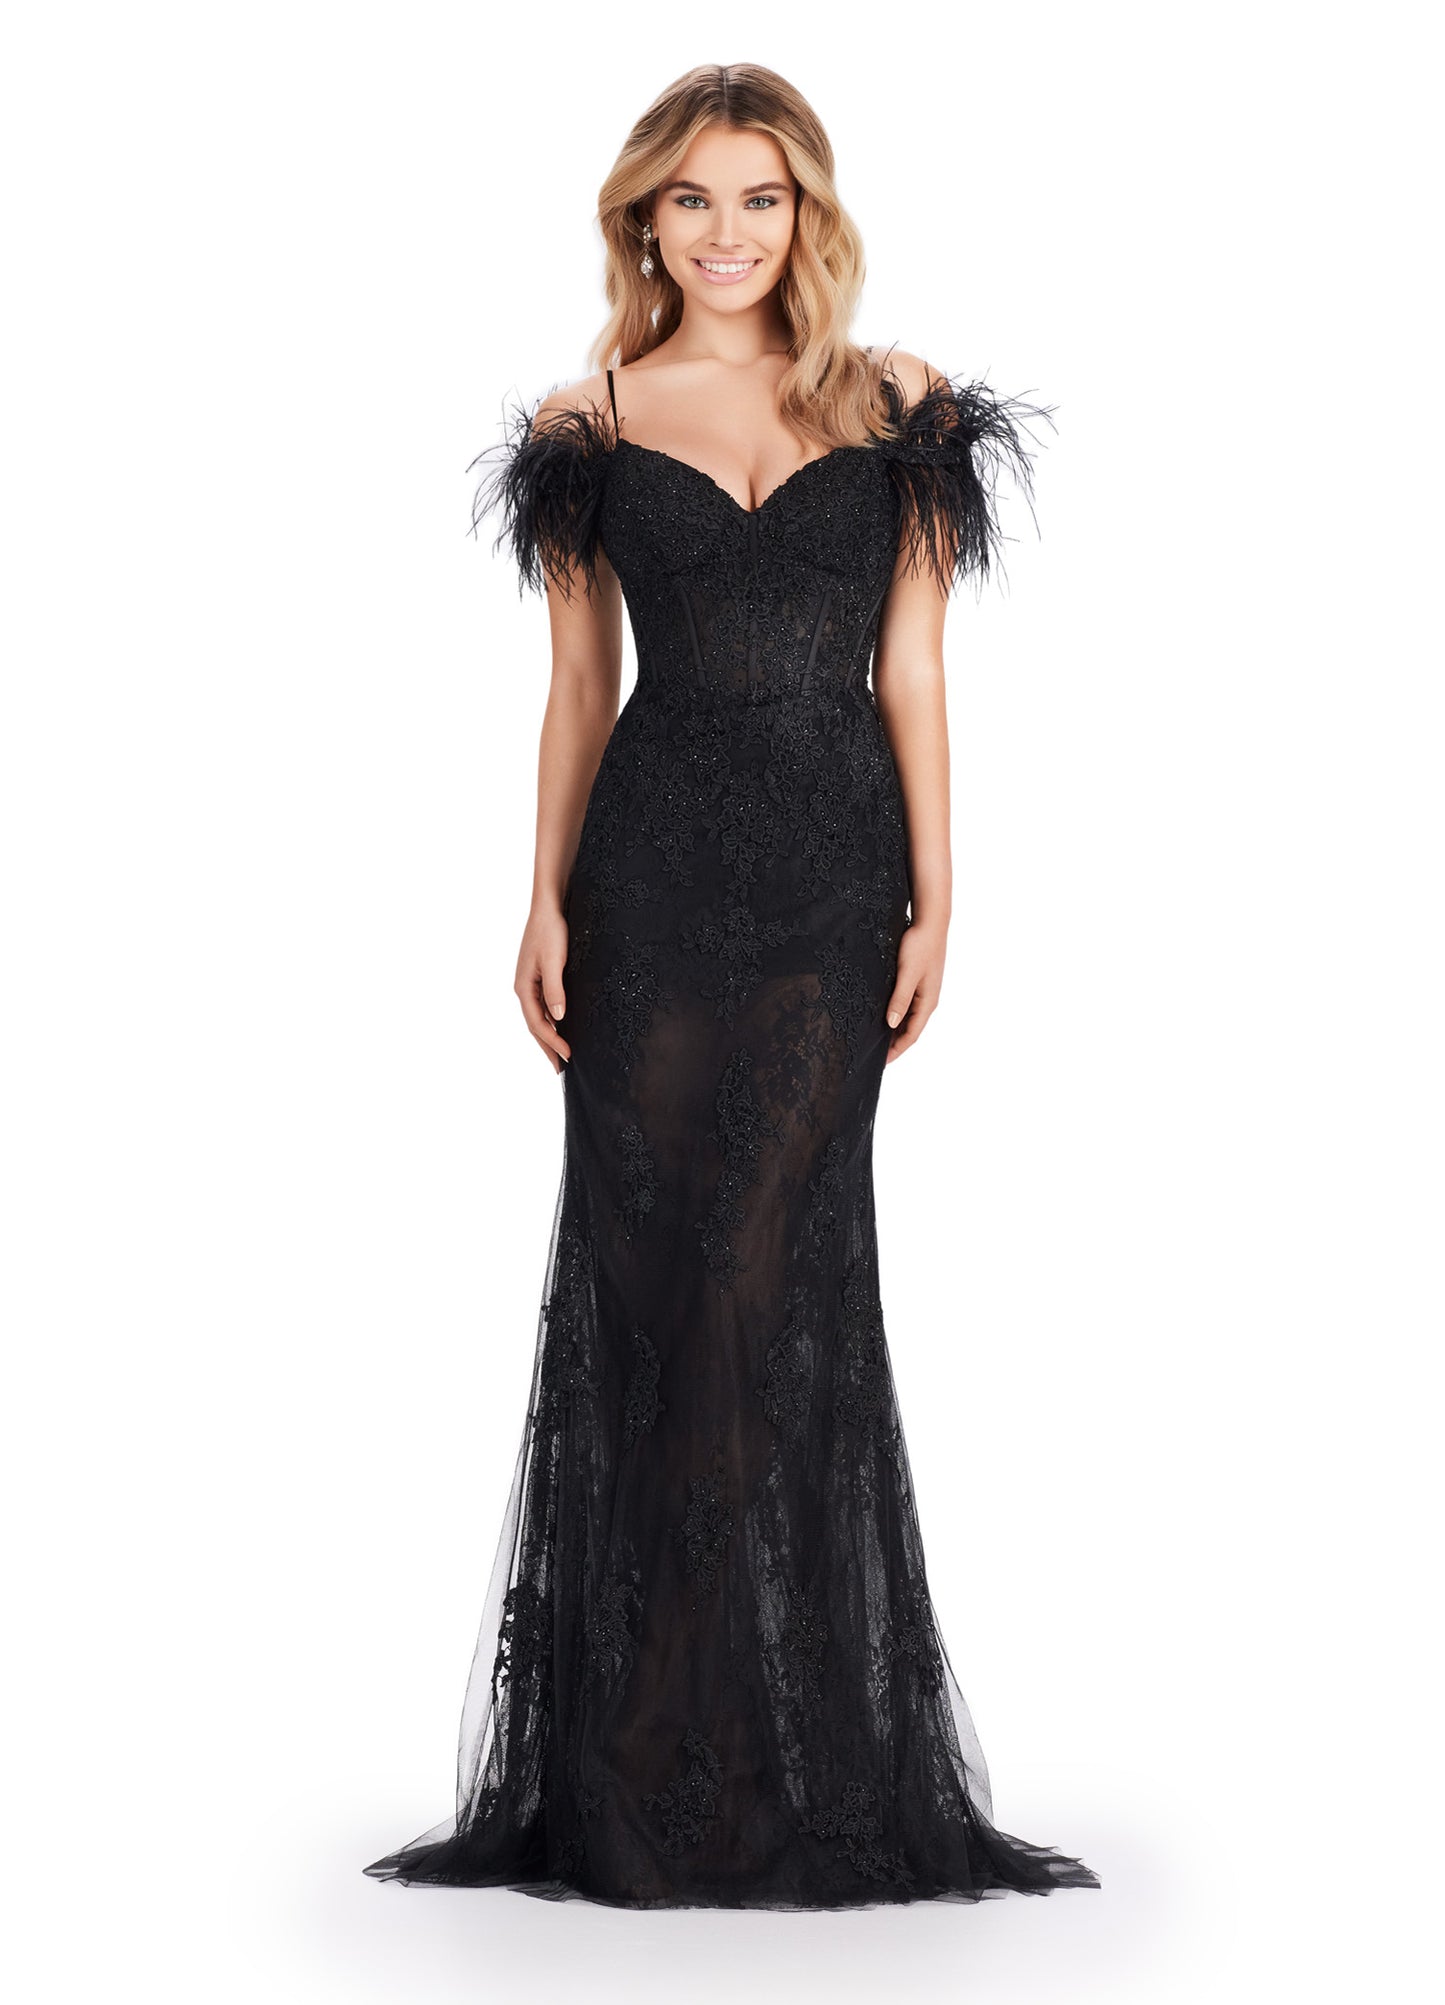 Expertly designed by Ashley Lauren, this Long Prom Dress combines a fitted corset and embroidered details for a stunning silhouette. The off-shoulder neckline and feather sleeves add a touch of elegance to this formal pageant gown. Make a statement with this unique and fashionable dress. Stun the crowd in this decadent gown! Made of our scuba fabric, its off the shoulder sleeves flow into an elegant front bow for the perfect look!